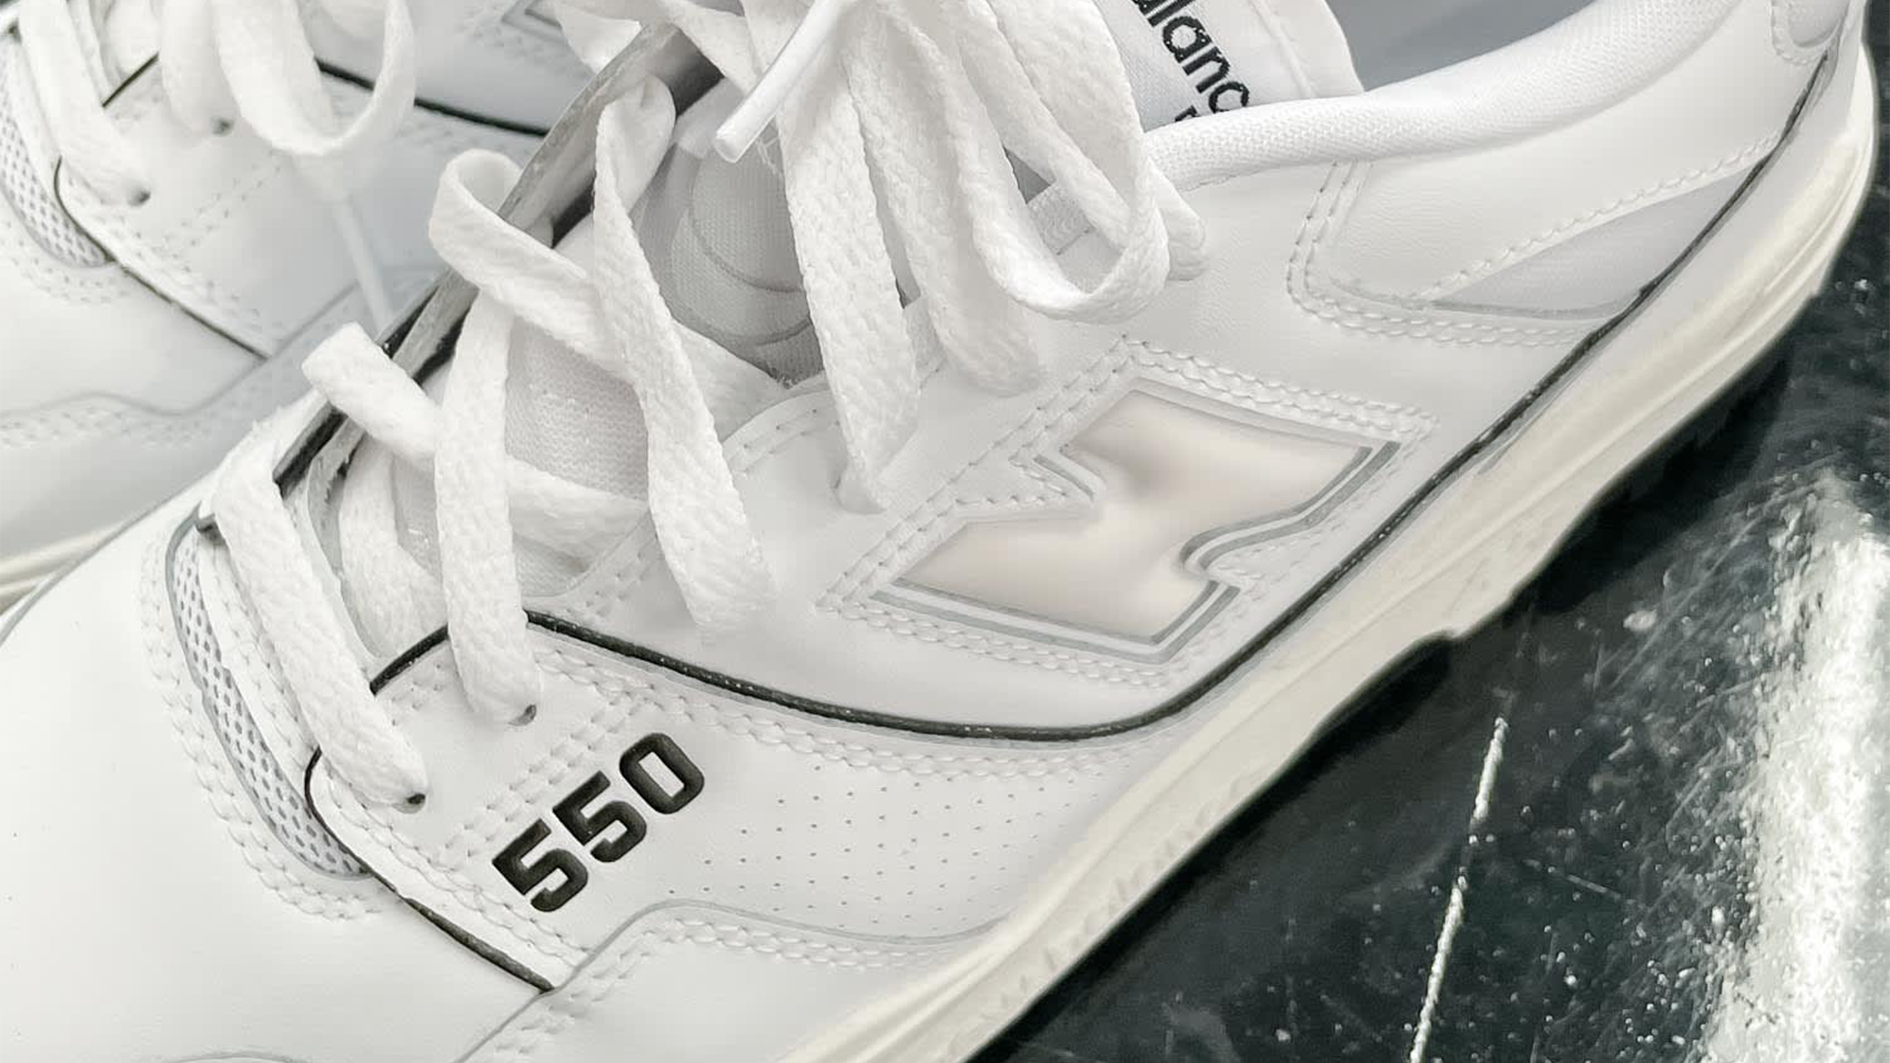 We Comme des Garçons to Thank For The Next New Balance 550 Collaboration | The